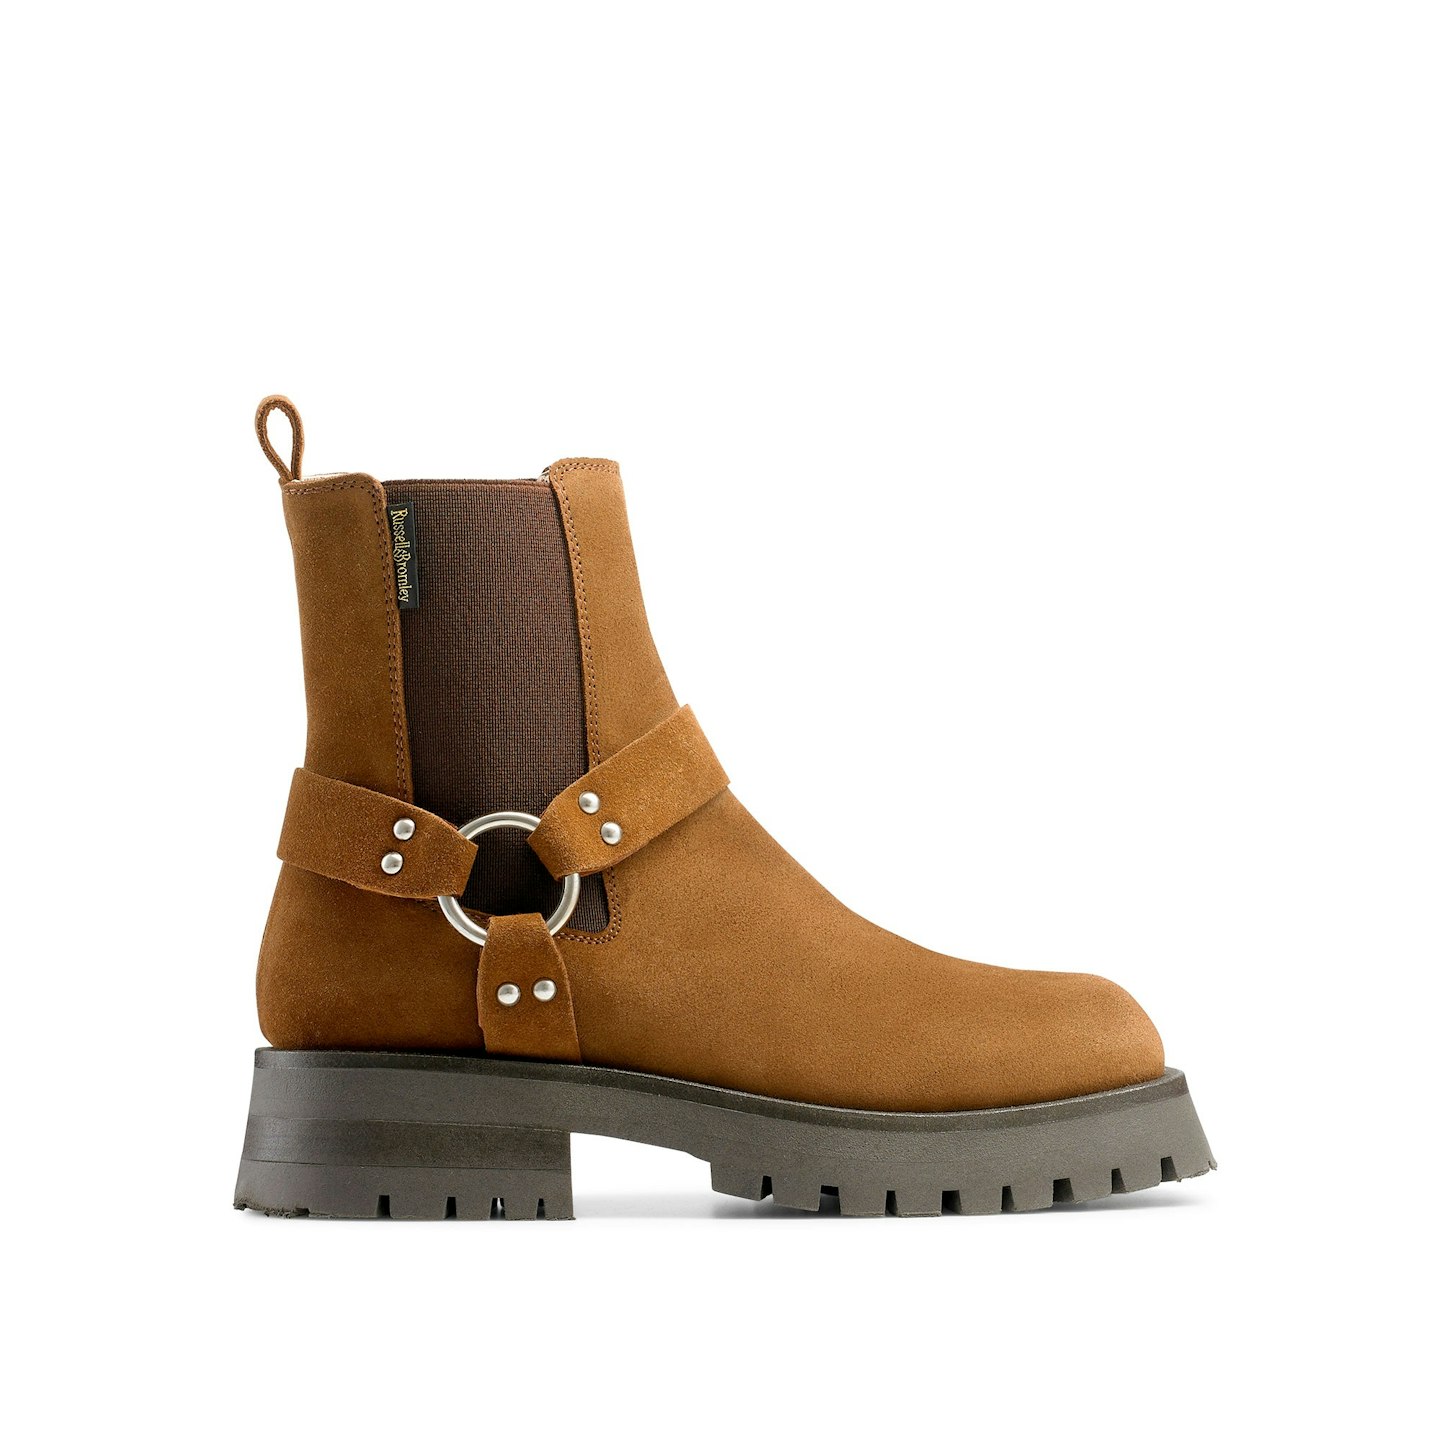 Russell & Bromley, Harness Feature Chelsea Boot